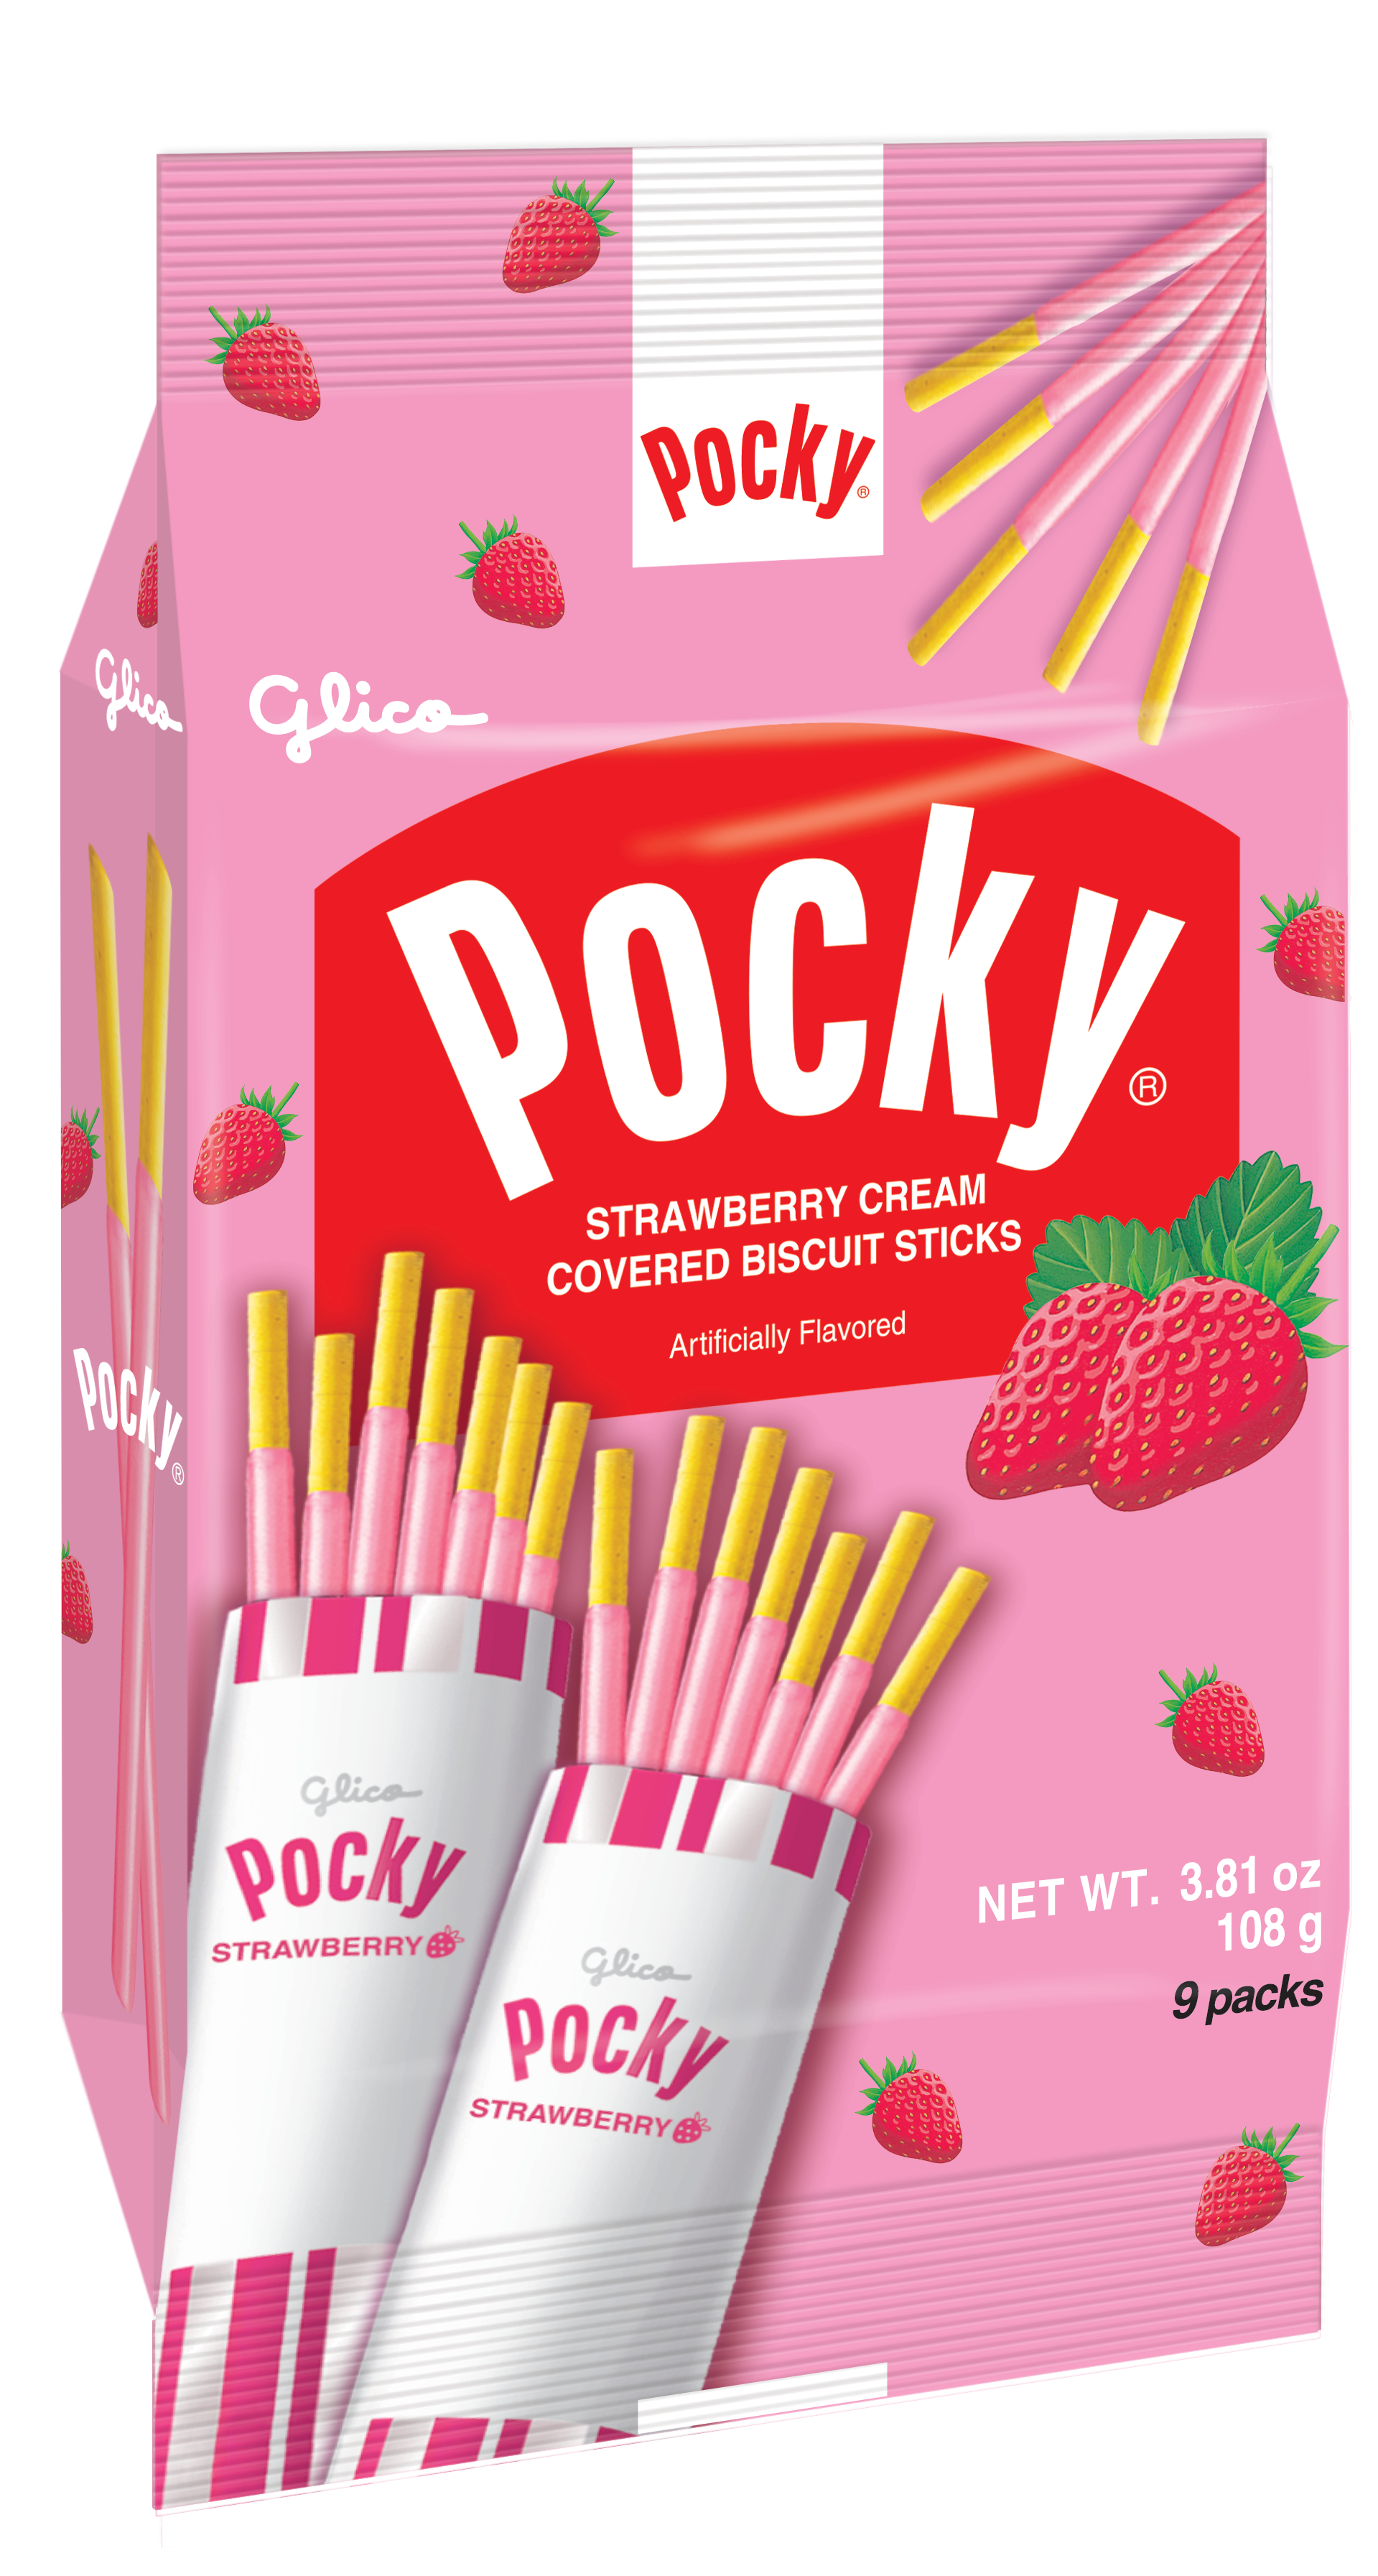  Glico Pocky Chocolate, 1.41-Ounce Boxes (Pack of 20